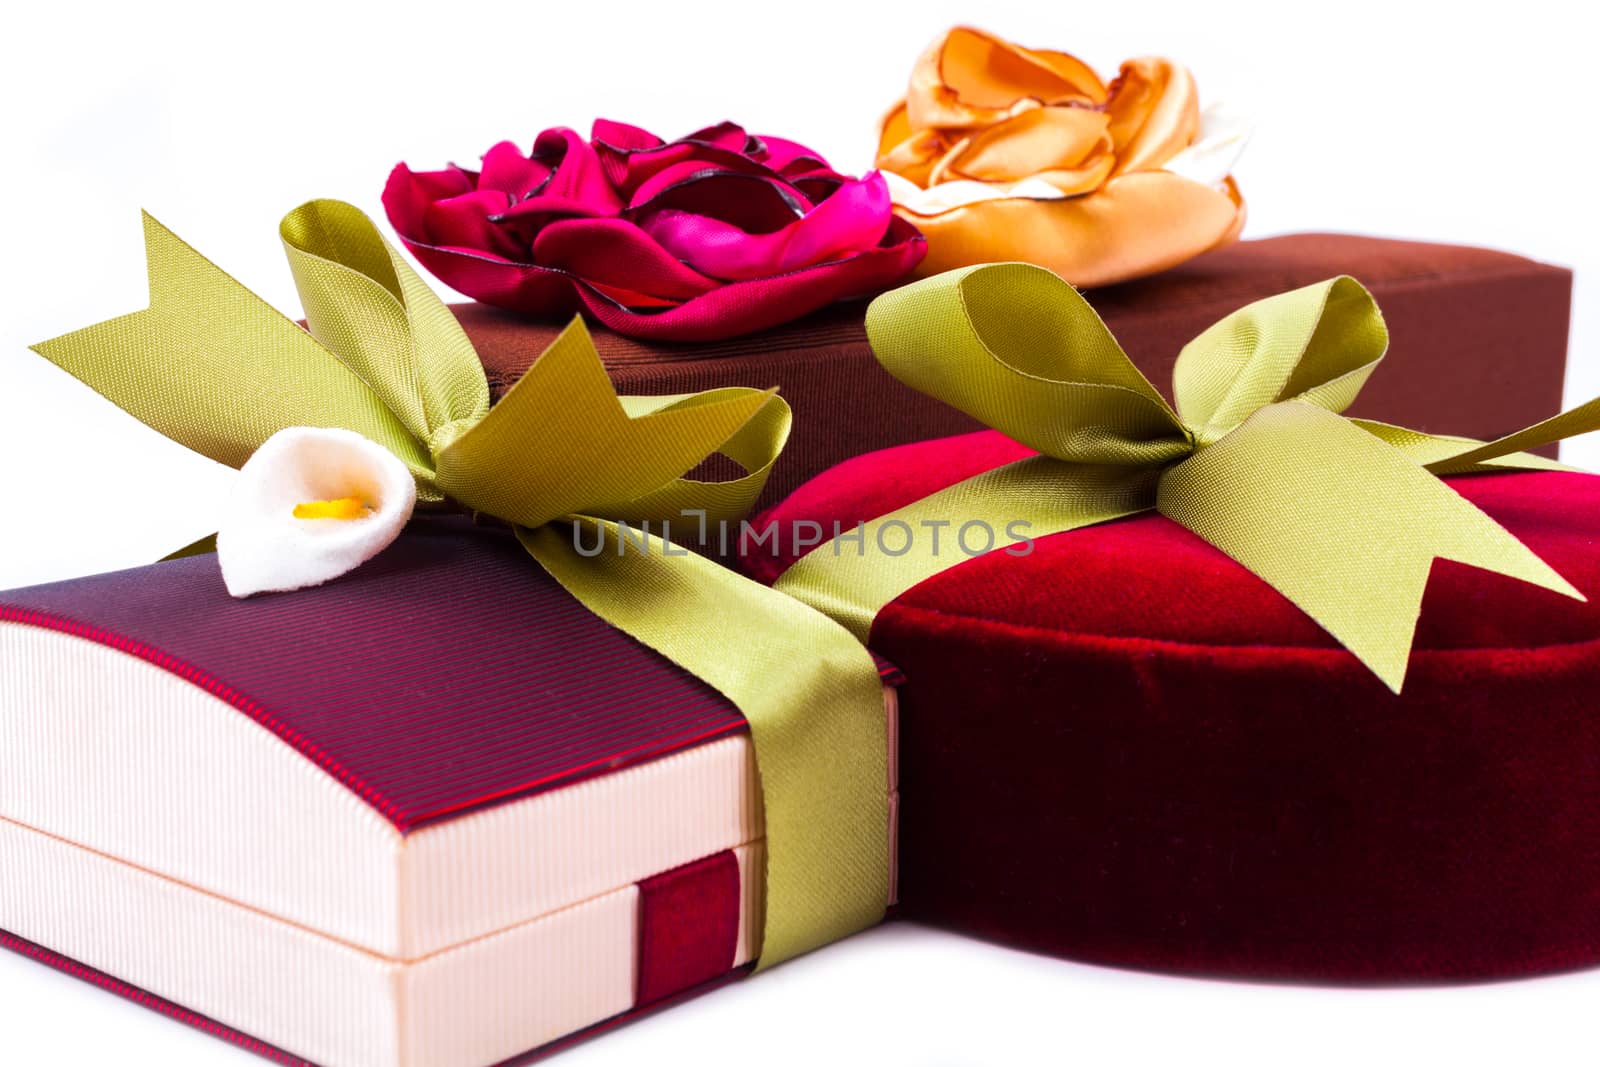 Luxury gift boxes in dark red and brown shades with green satin ribbon and bow isolated over white background.